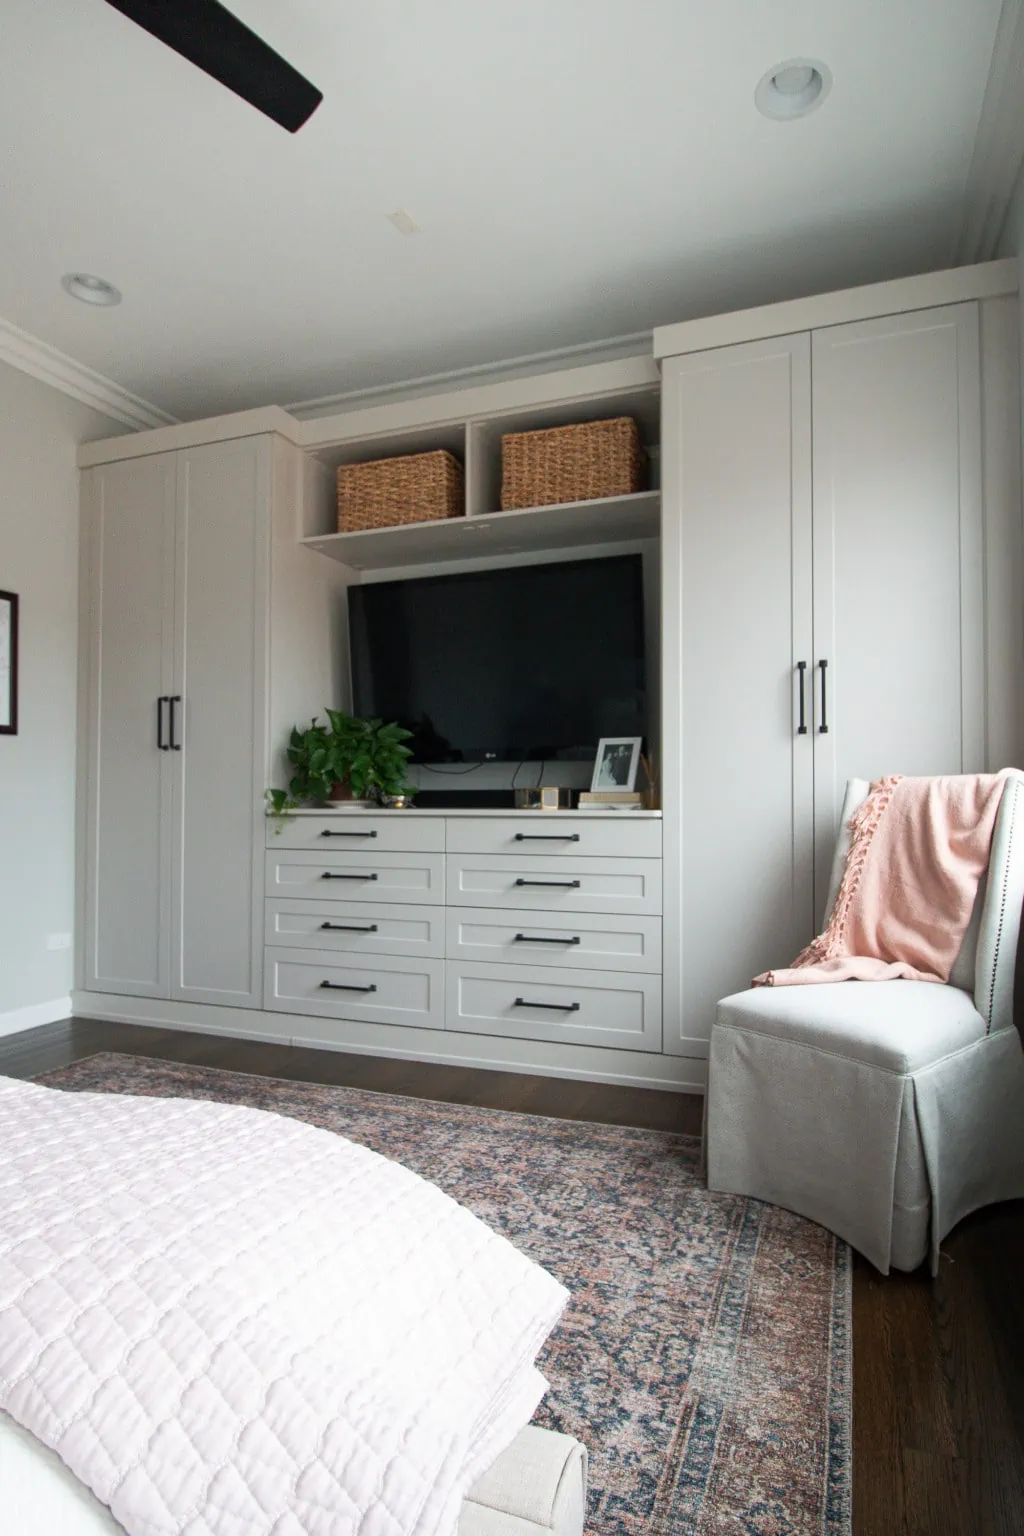 My best tips to organize built-ins